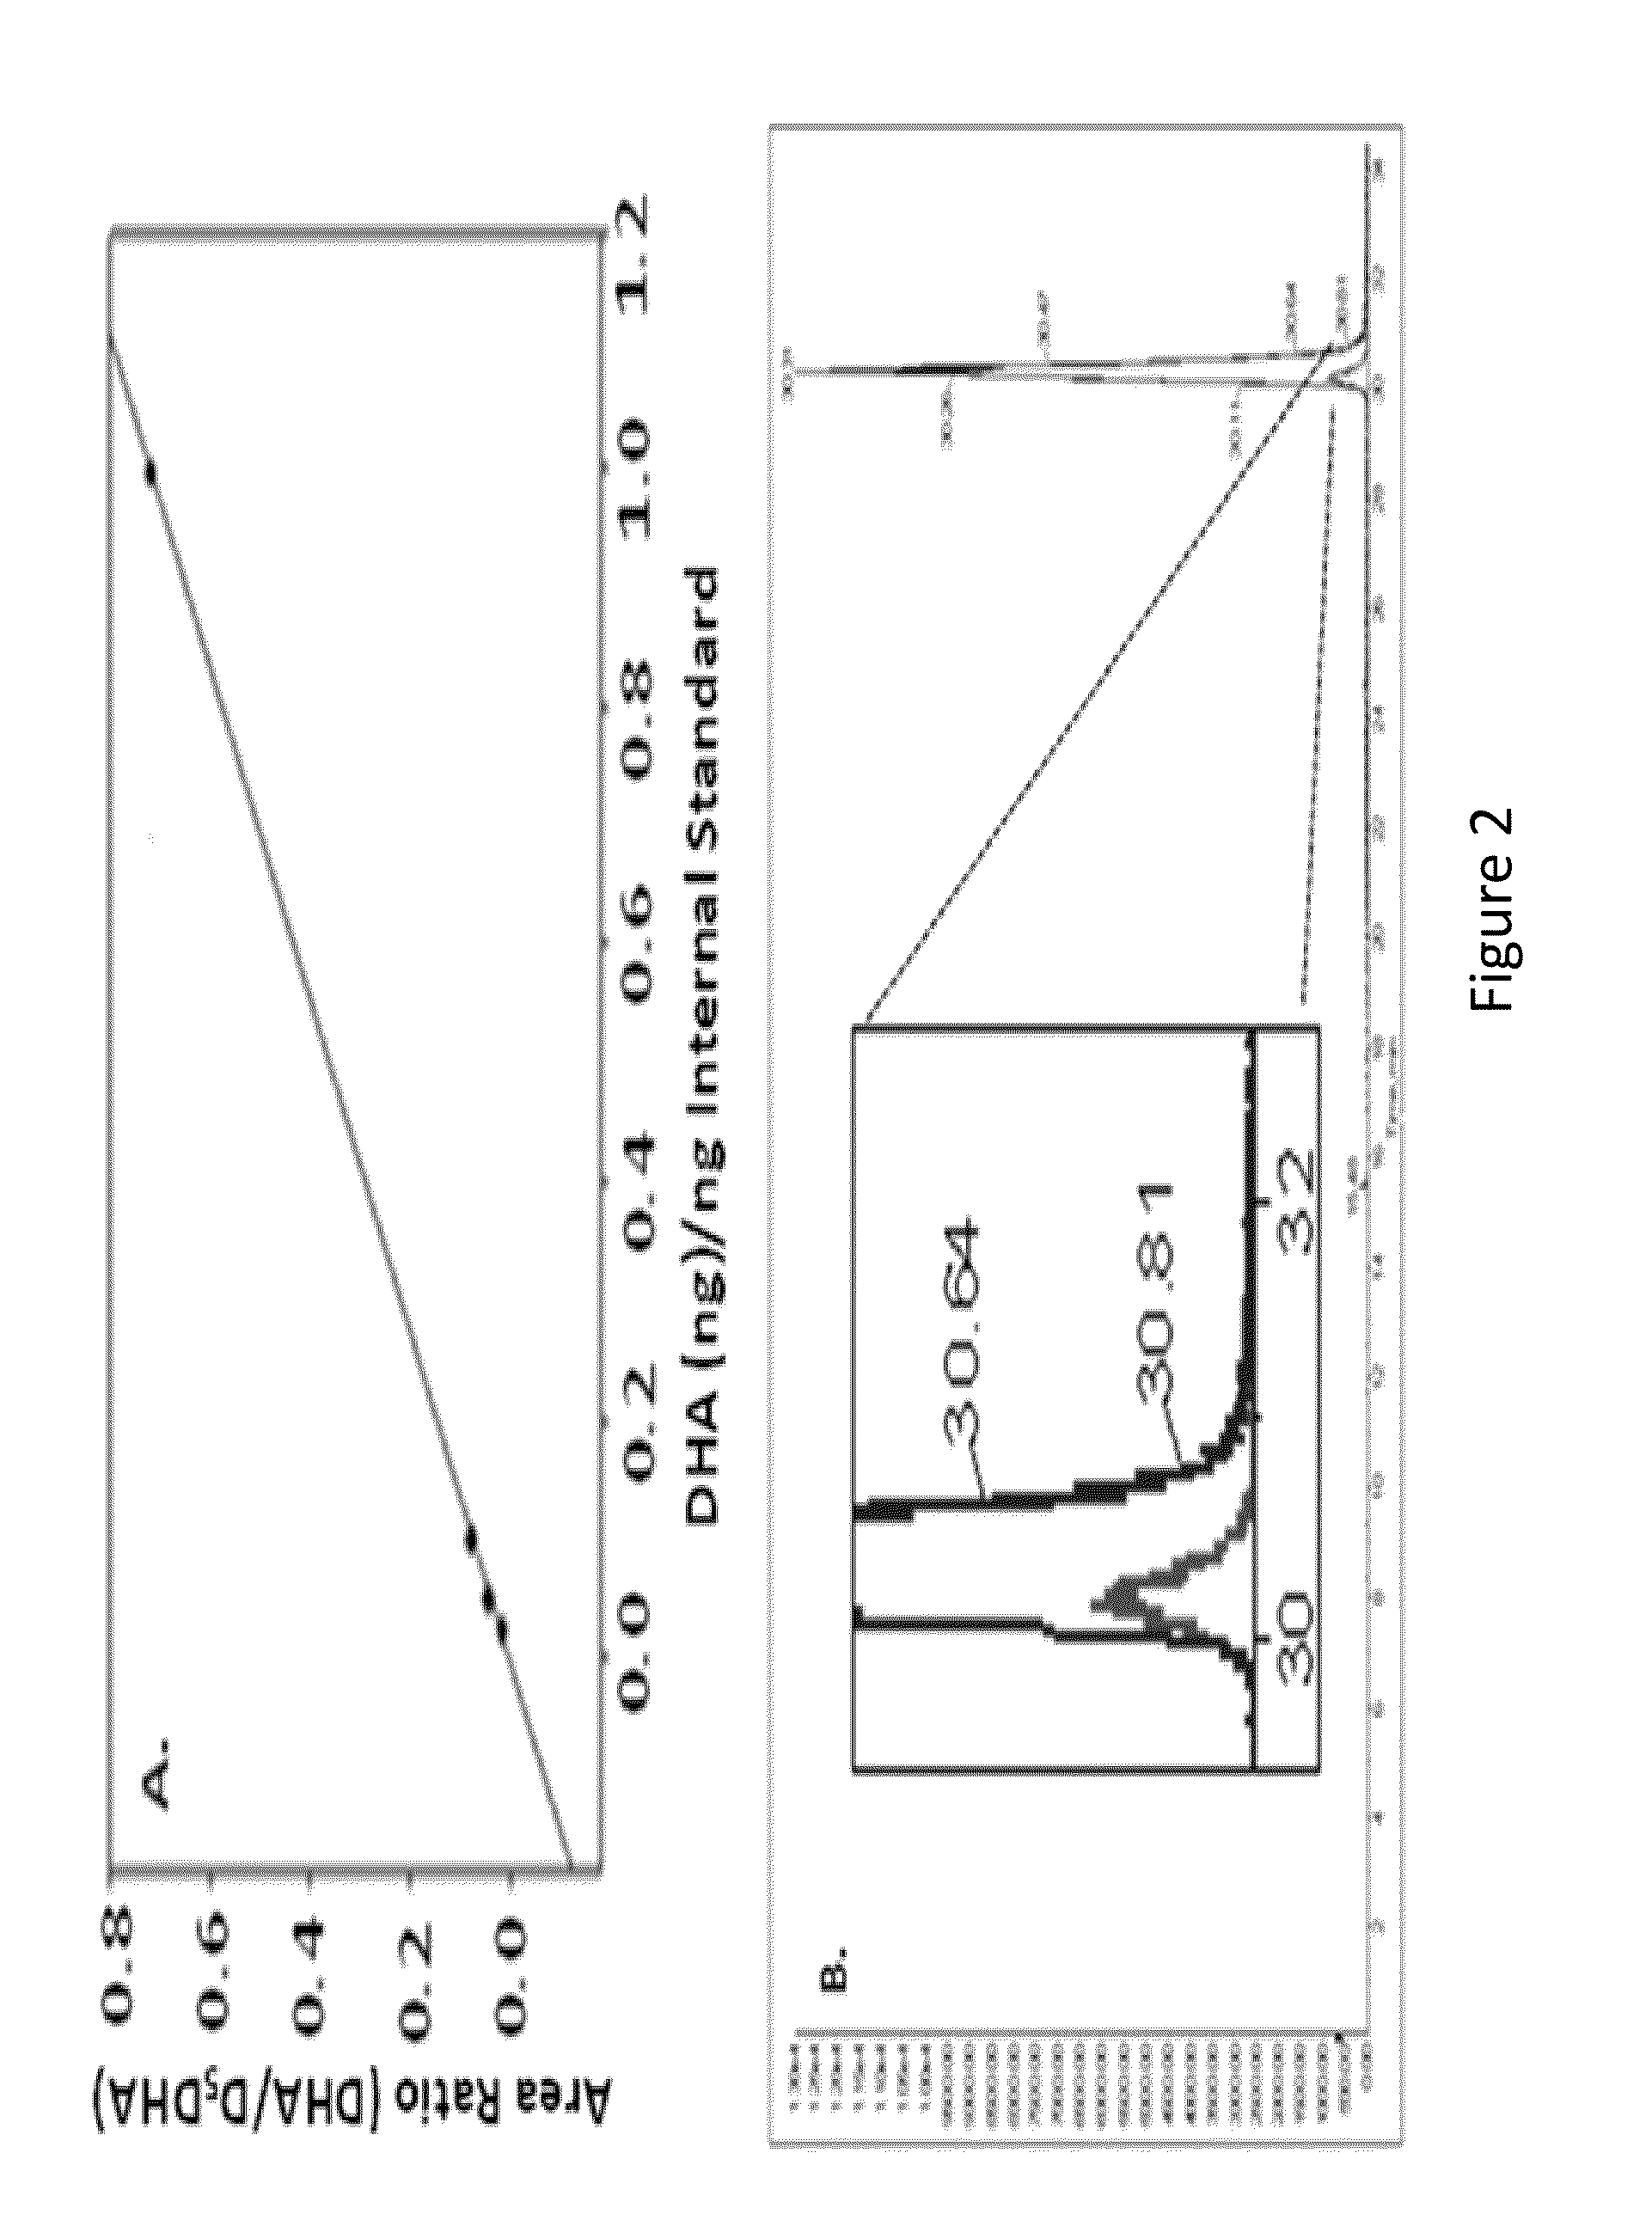 Acid Stable Liposomal Compositions And Methods For Producing The Same